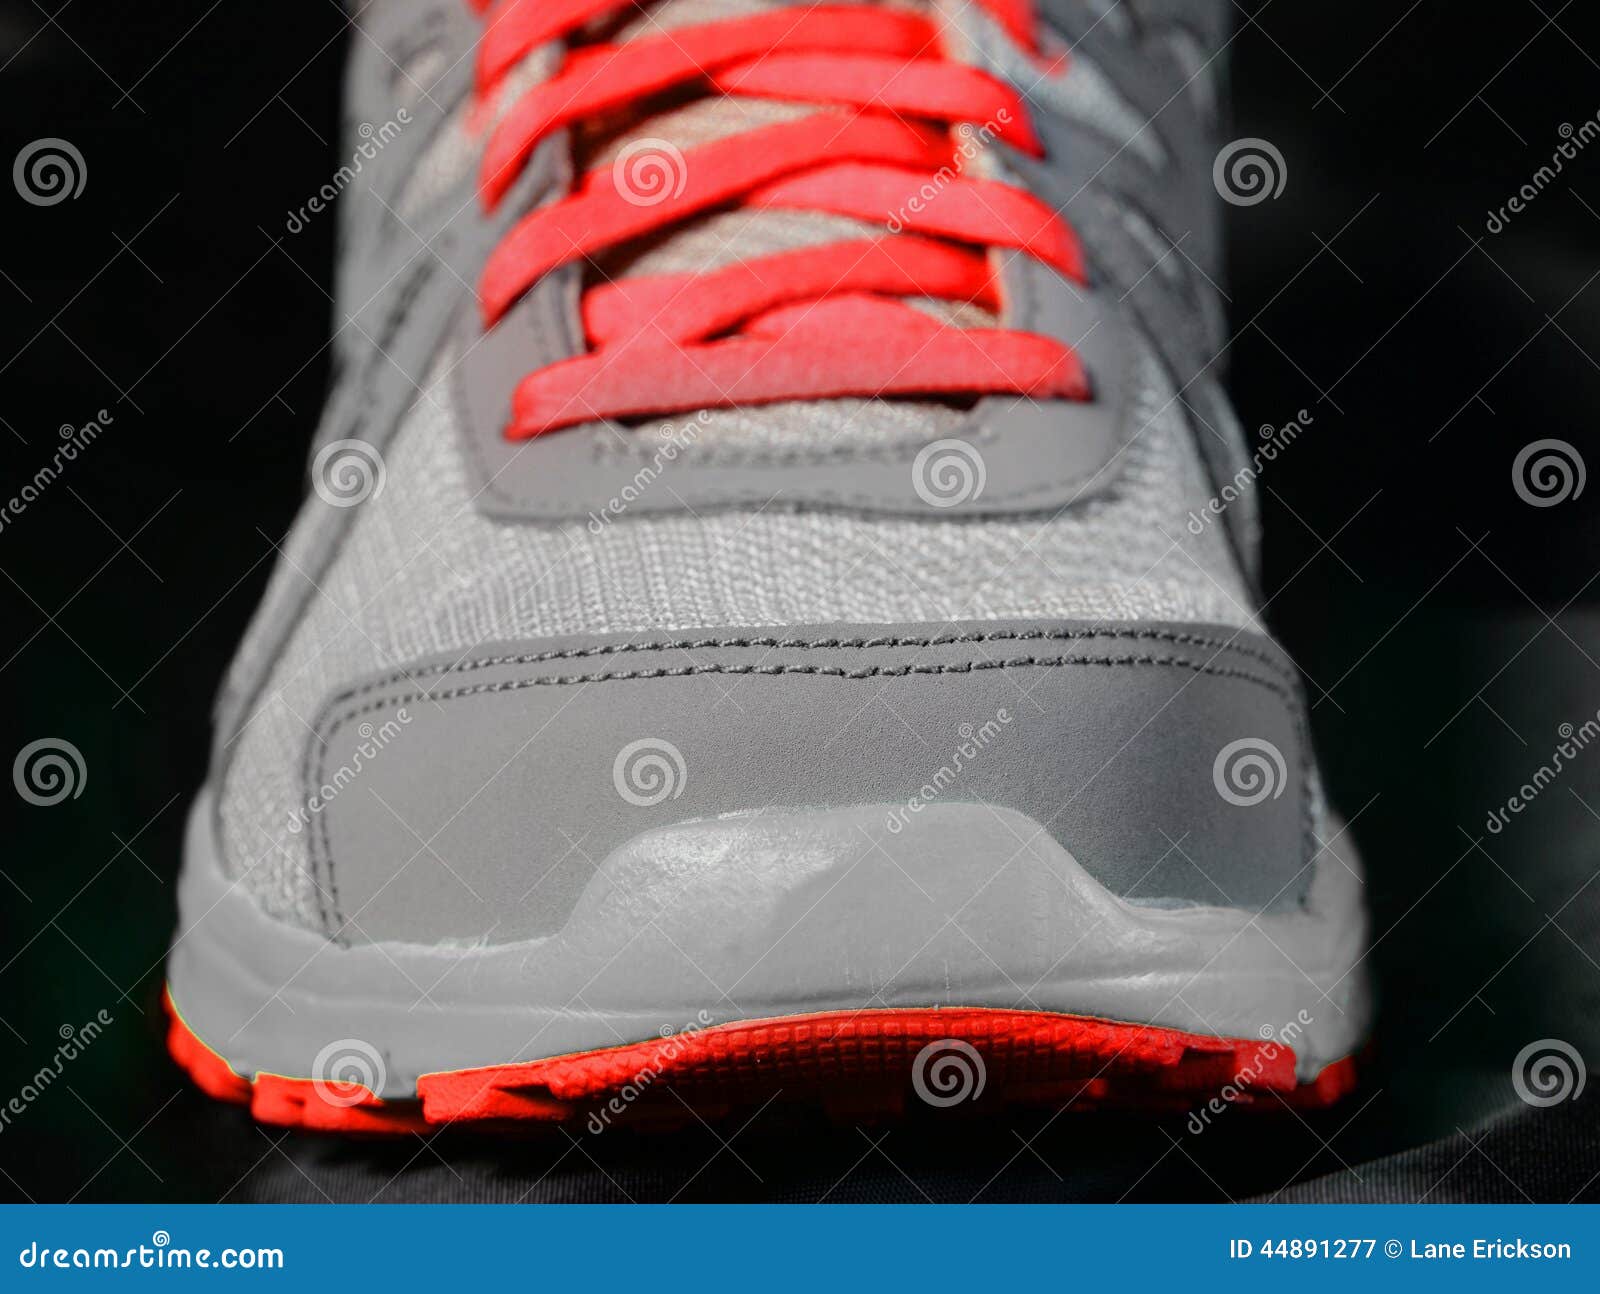 Red Shoe Laces on Running Shoes Stock Image - Image of pattern, closeup ...